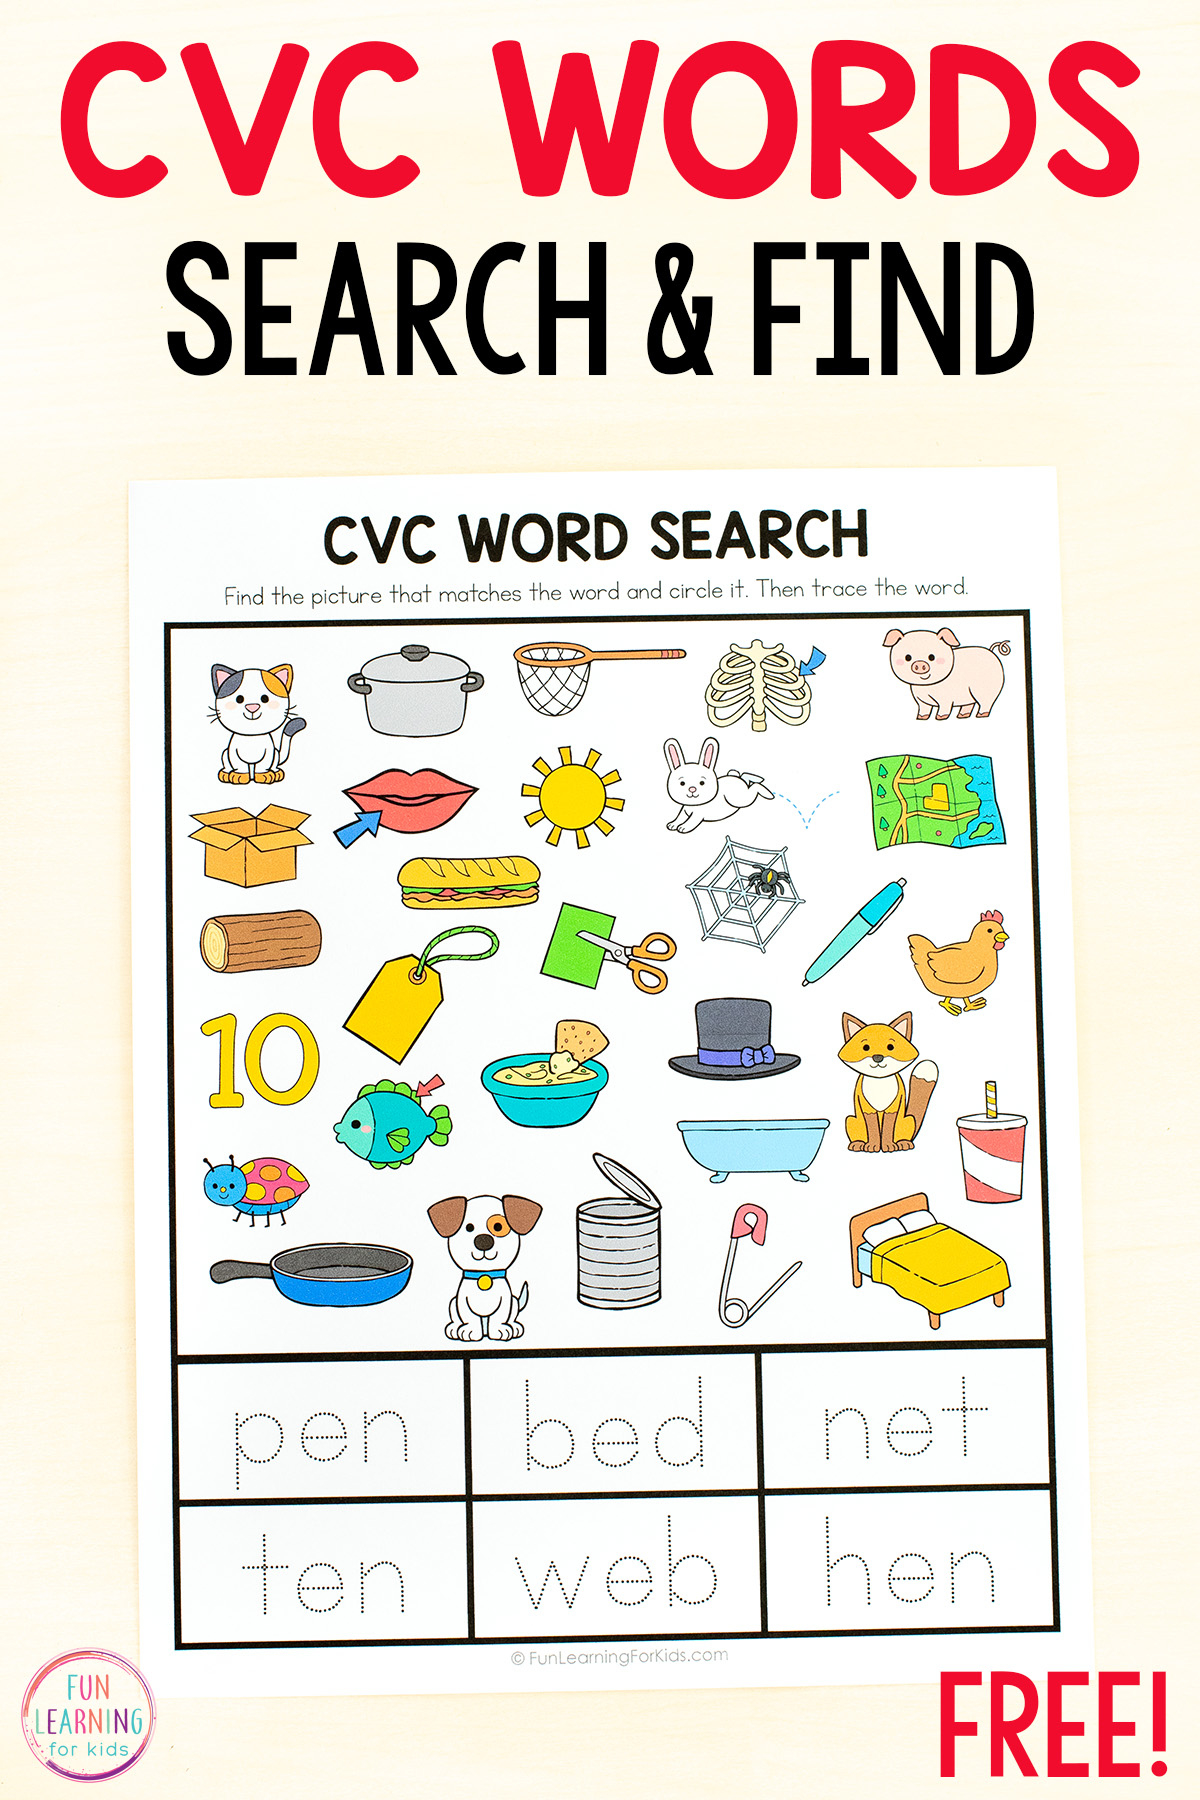 Word Search Cvc Worksheets Free Printable in Cvc Words Worksheets Free Printable